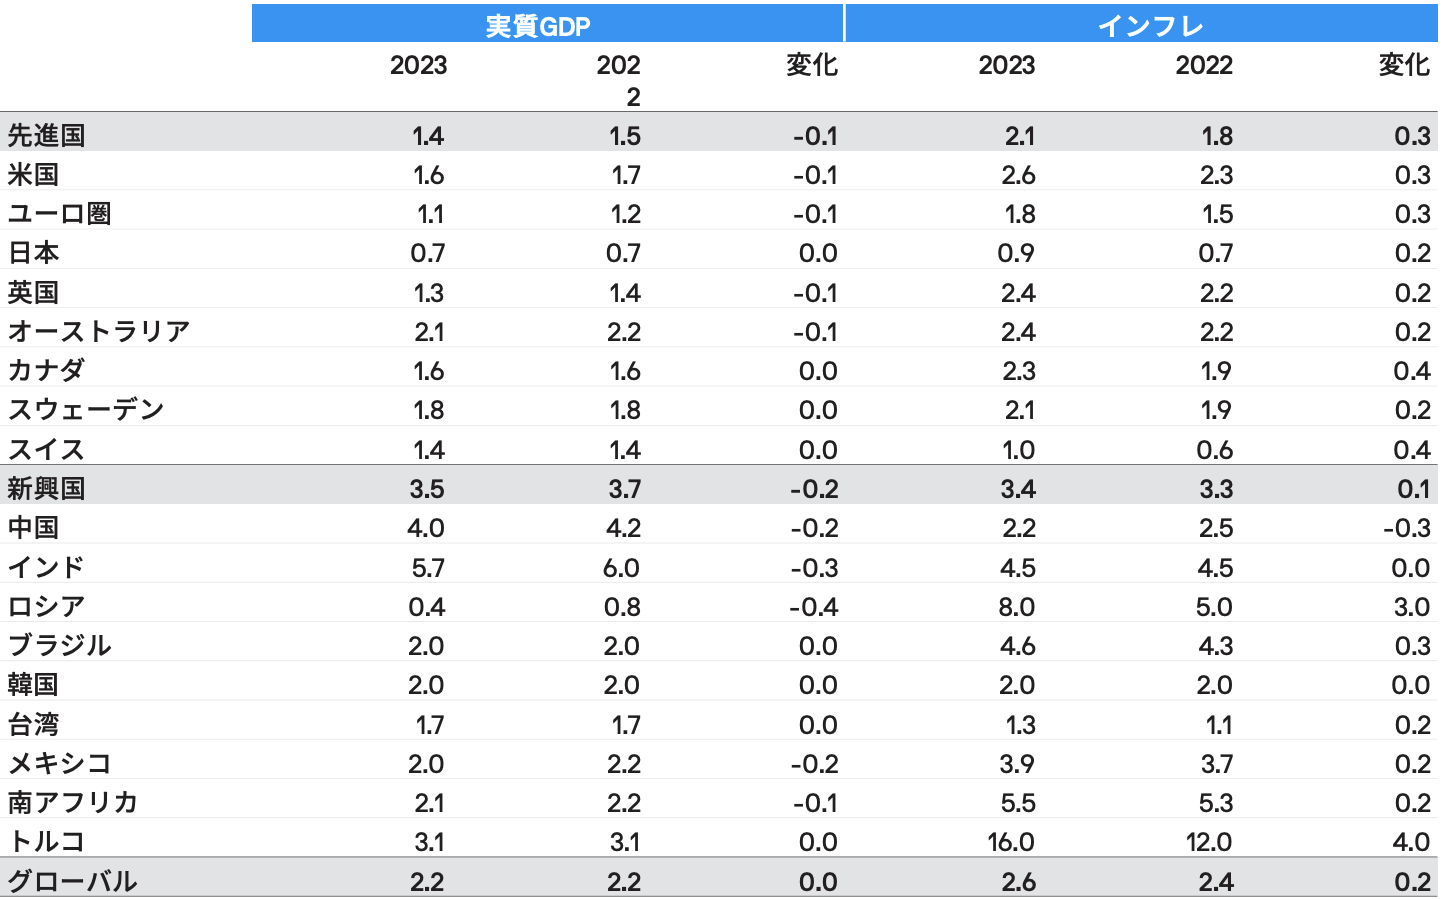 This table breaks down our 2023 assumptions for GDP growth and inflation for a range of developed and emerging markets. We lower our expectations for DM growth by 0.1ppt, to 1.4%; we raise our DM inflation outlook by 0.3ppt, to 2.1%. Our EM growth forecast drops by 0.2ppt, to 3.5%; EM inflation is expected to rise 0.1%, to 3.4%.